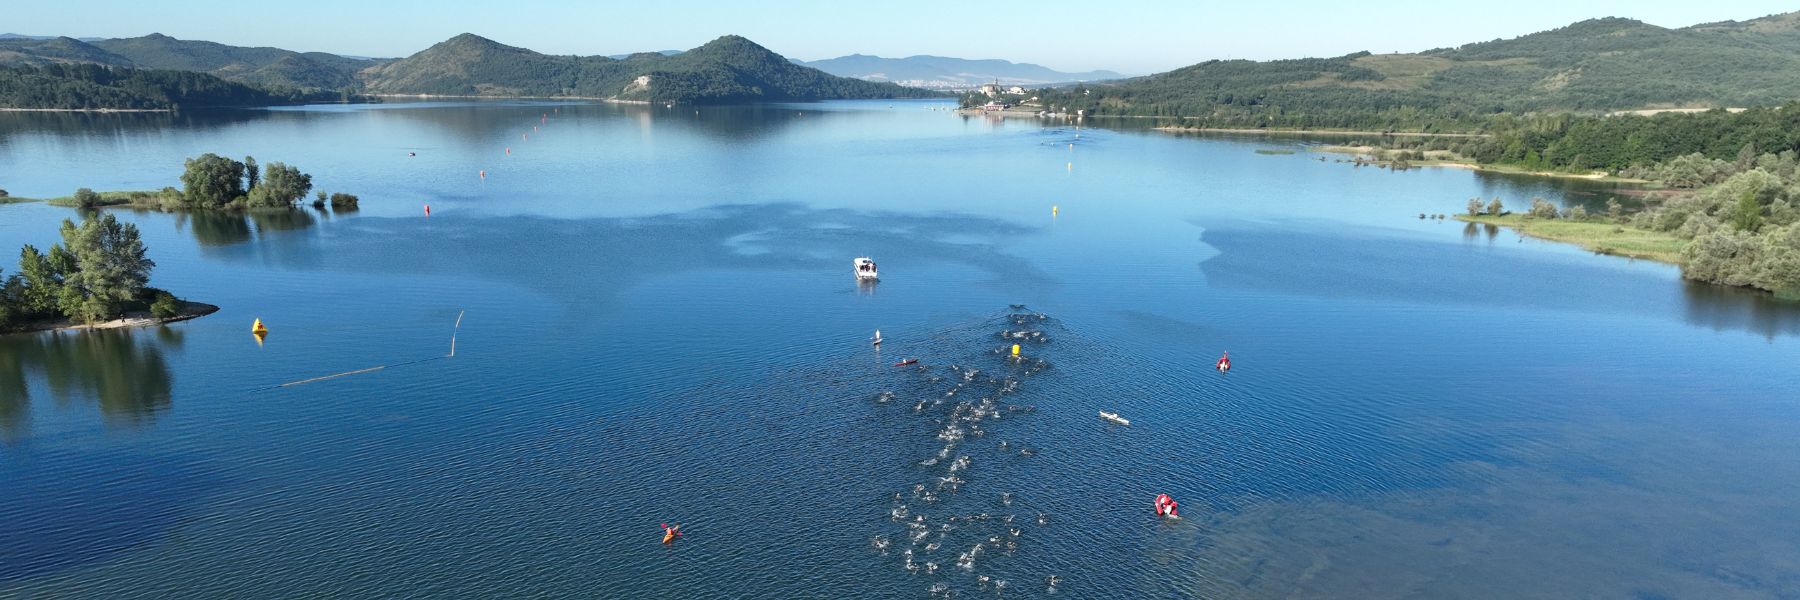 IRONMAN Vitoria-Gasteiz athlete standing in Ulibarri-Gamboa lake located in the Landa Provincial Park who is looking around and ready for the swim